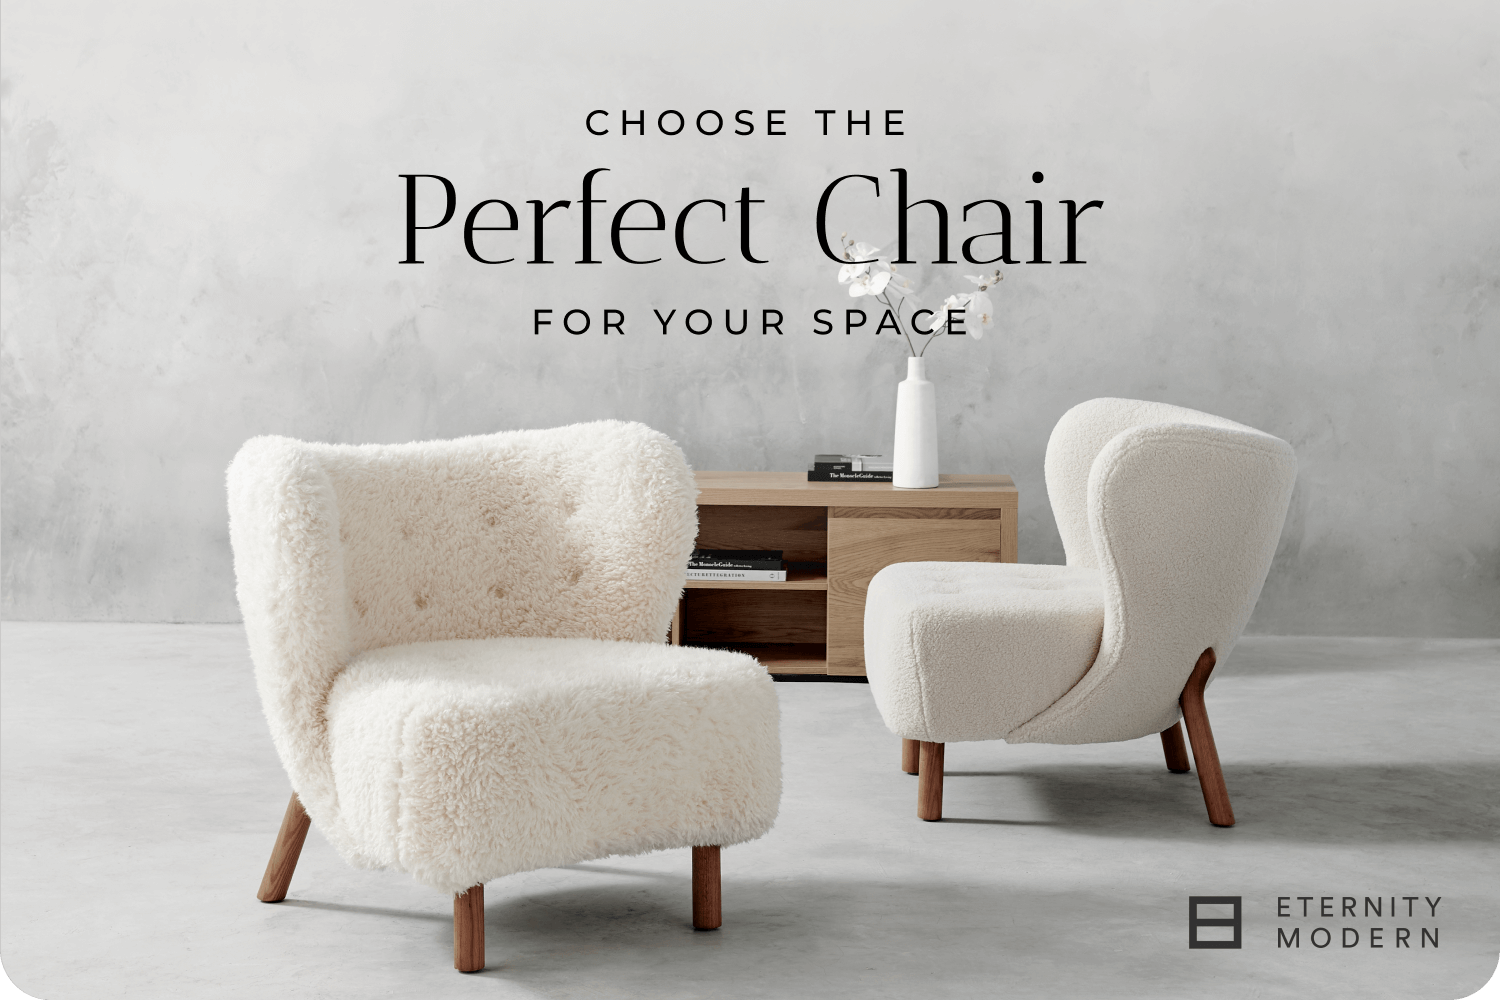 Choose the perfect chair for your space